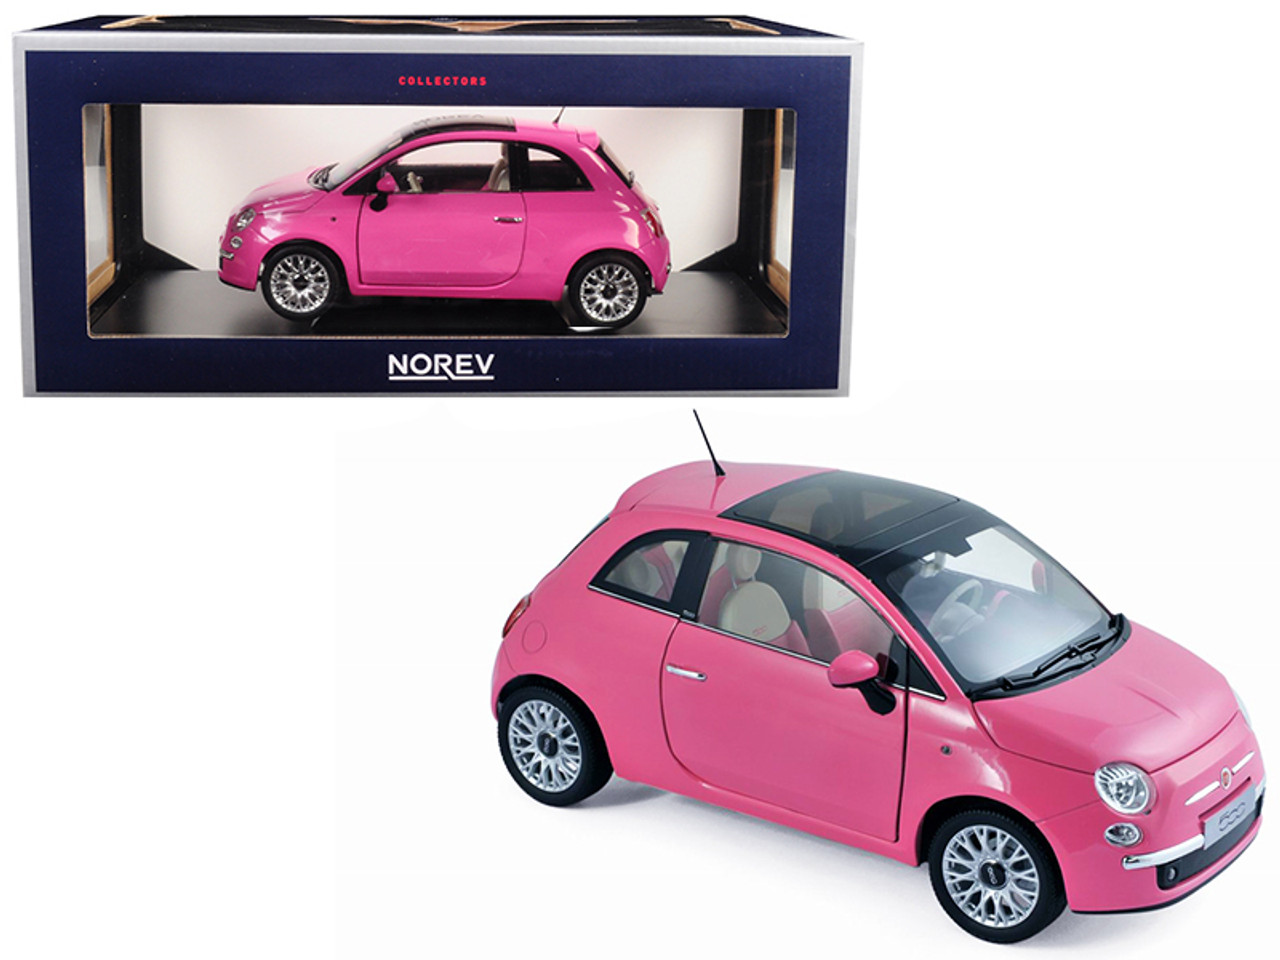 2010 Fiat 500 Pink 1/18 Diecast Model Car by Norev